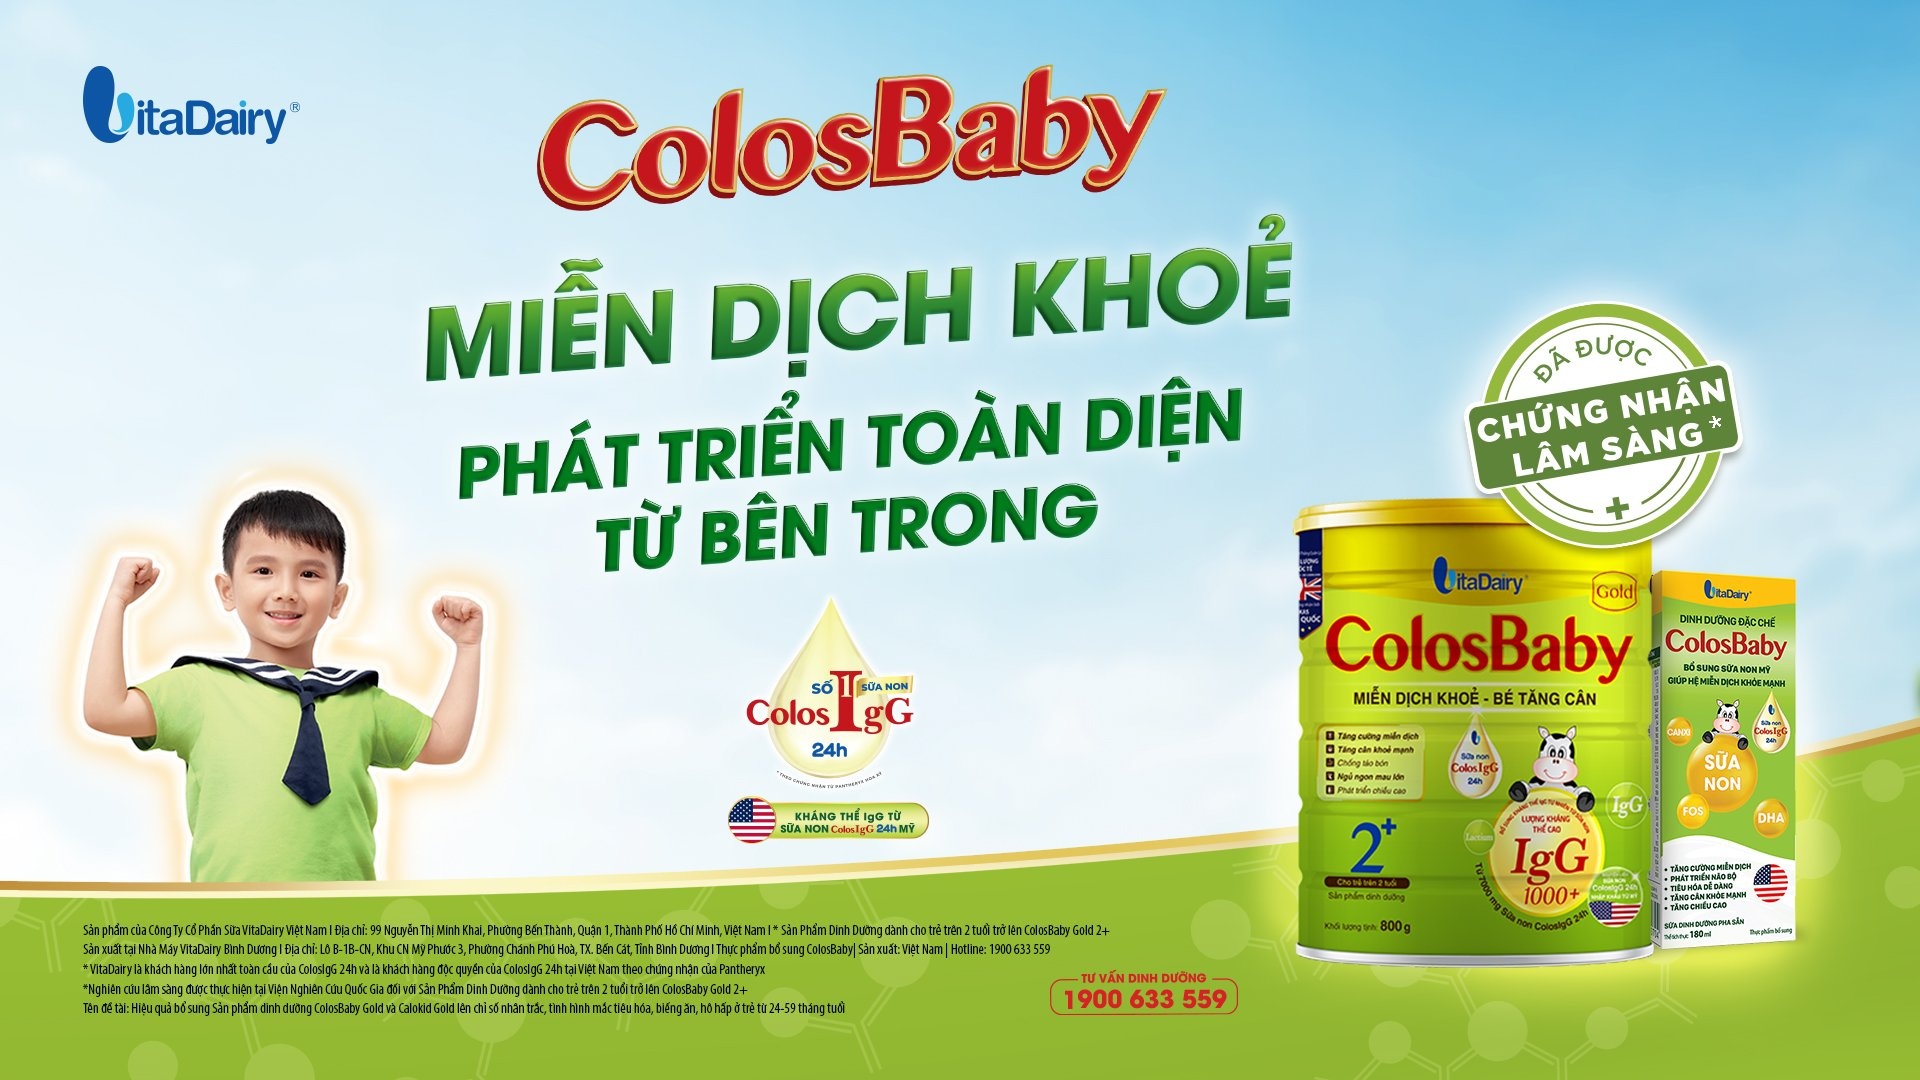 colosbaby gold giup tang cuong mien dich giam ty le nhiem khuan ho hap